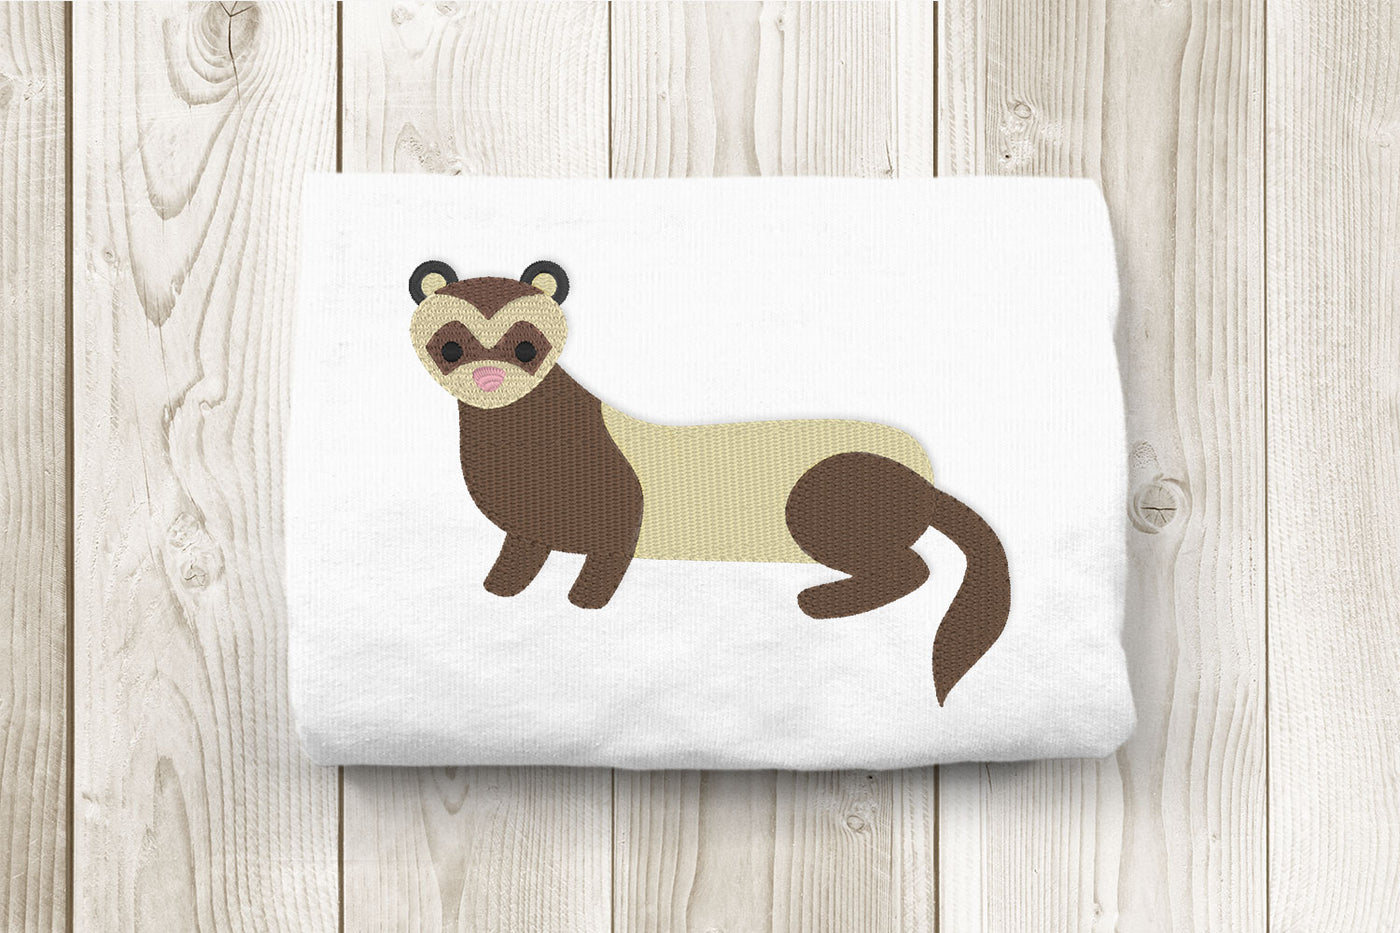 Ferret Embroidery File – Designed by Geeks